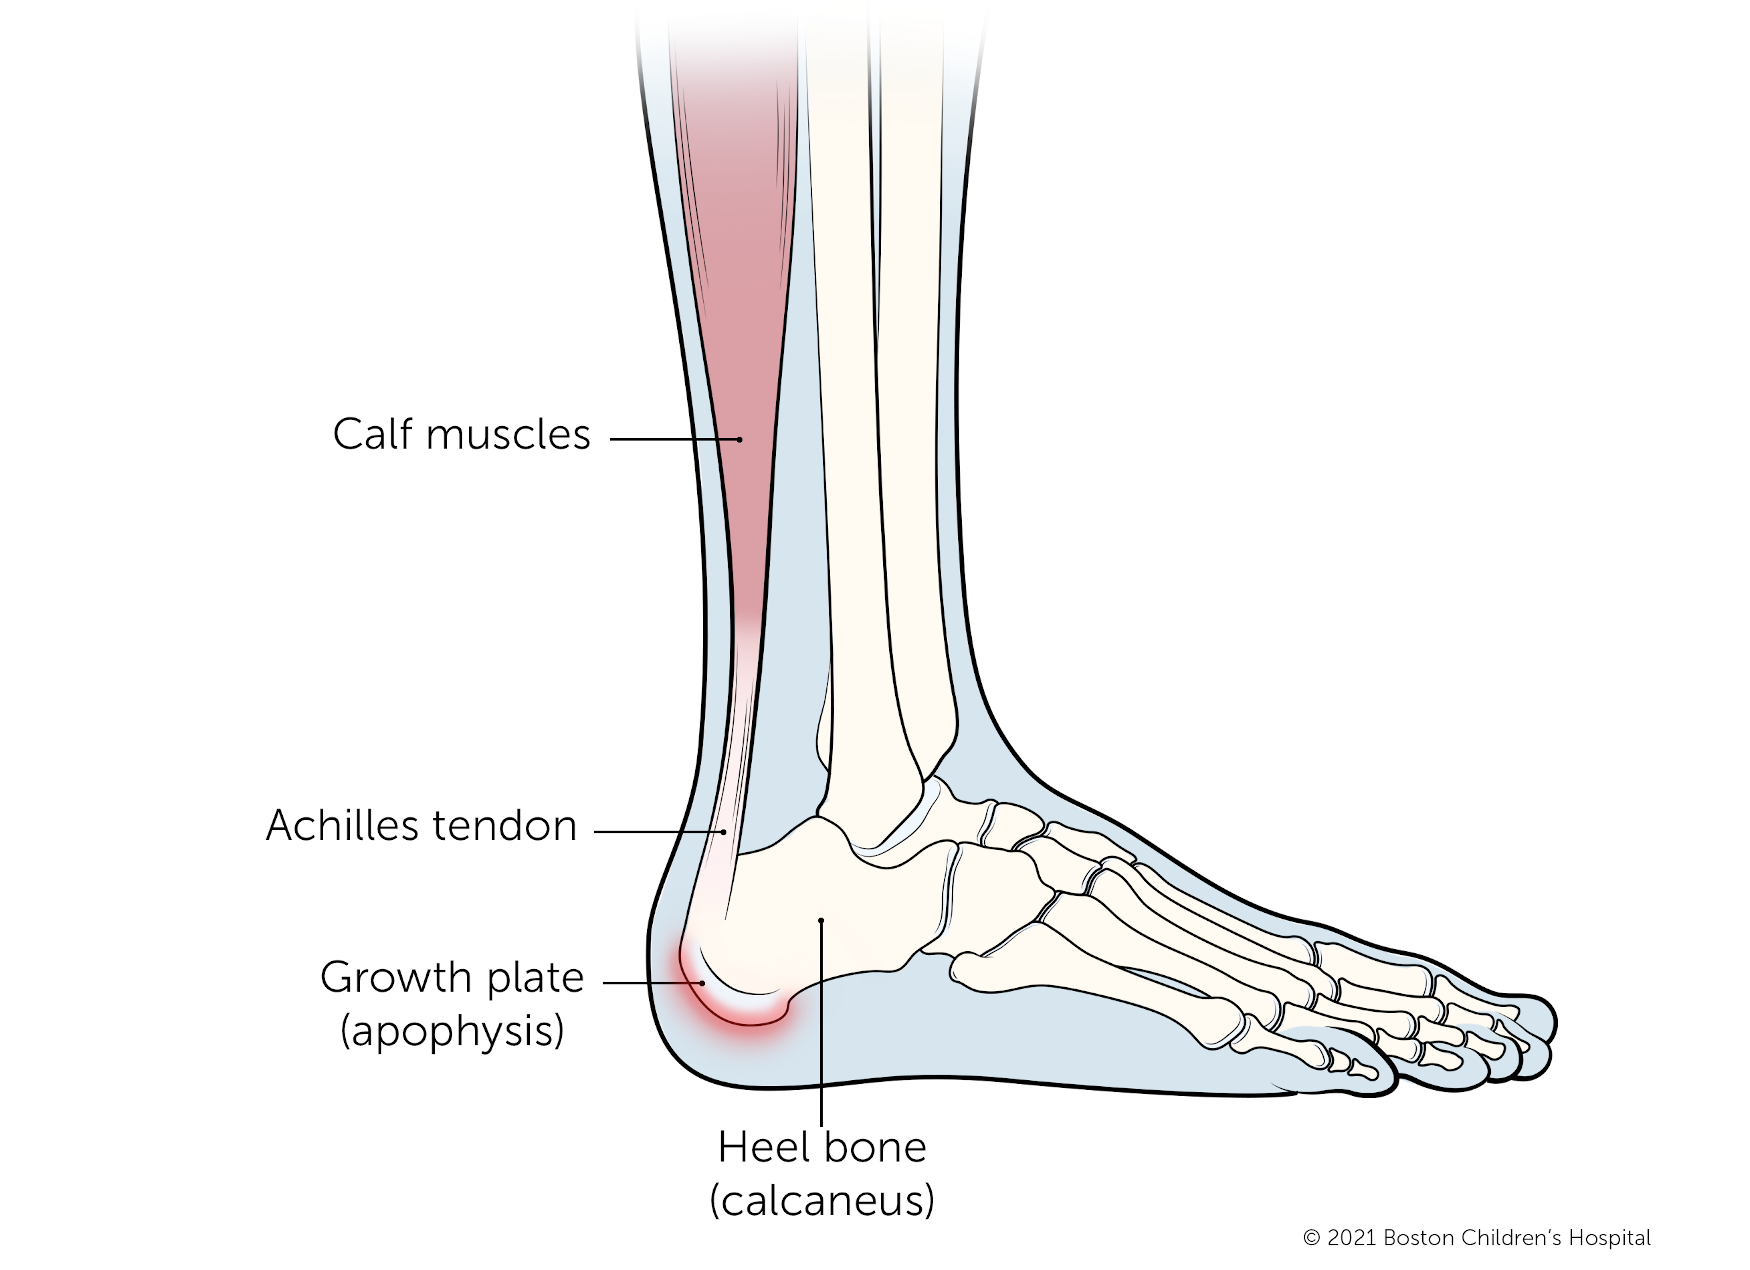 Plantar Fasciitis: Do and Don't Exercises | Carrothers Orthopaedics